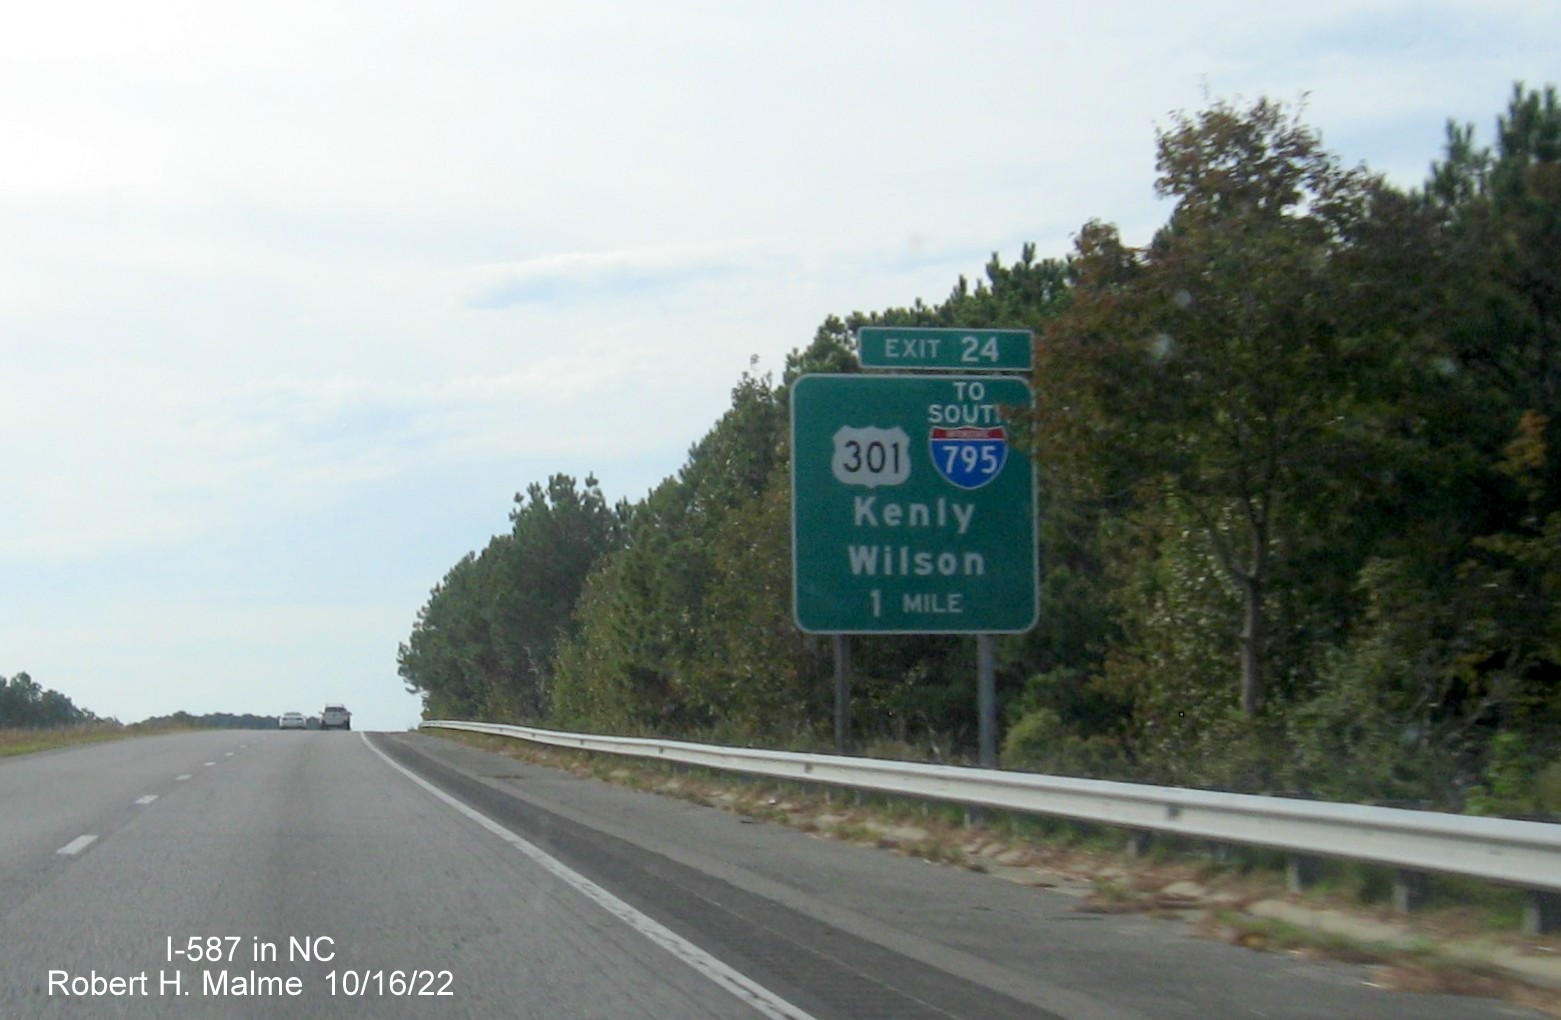 Image of 1 mile advance sign for US 301 to I-795 South exit with new I-587 milepost exit number on I-587/US 264 West in Wilson, October 2022